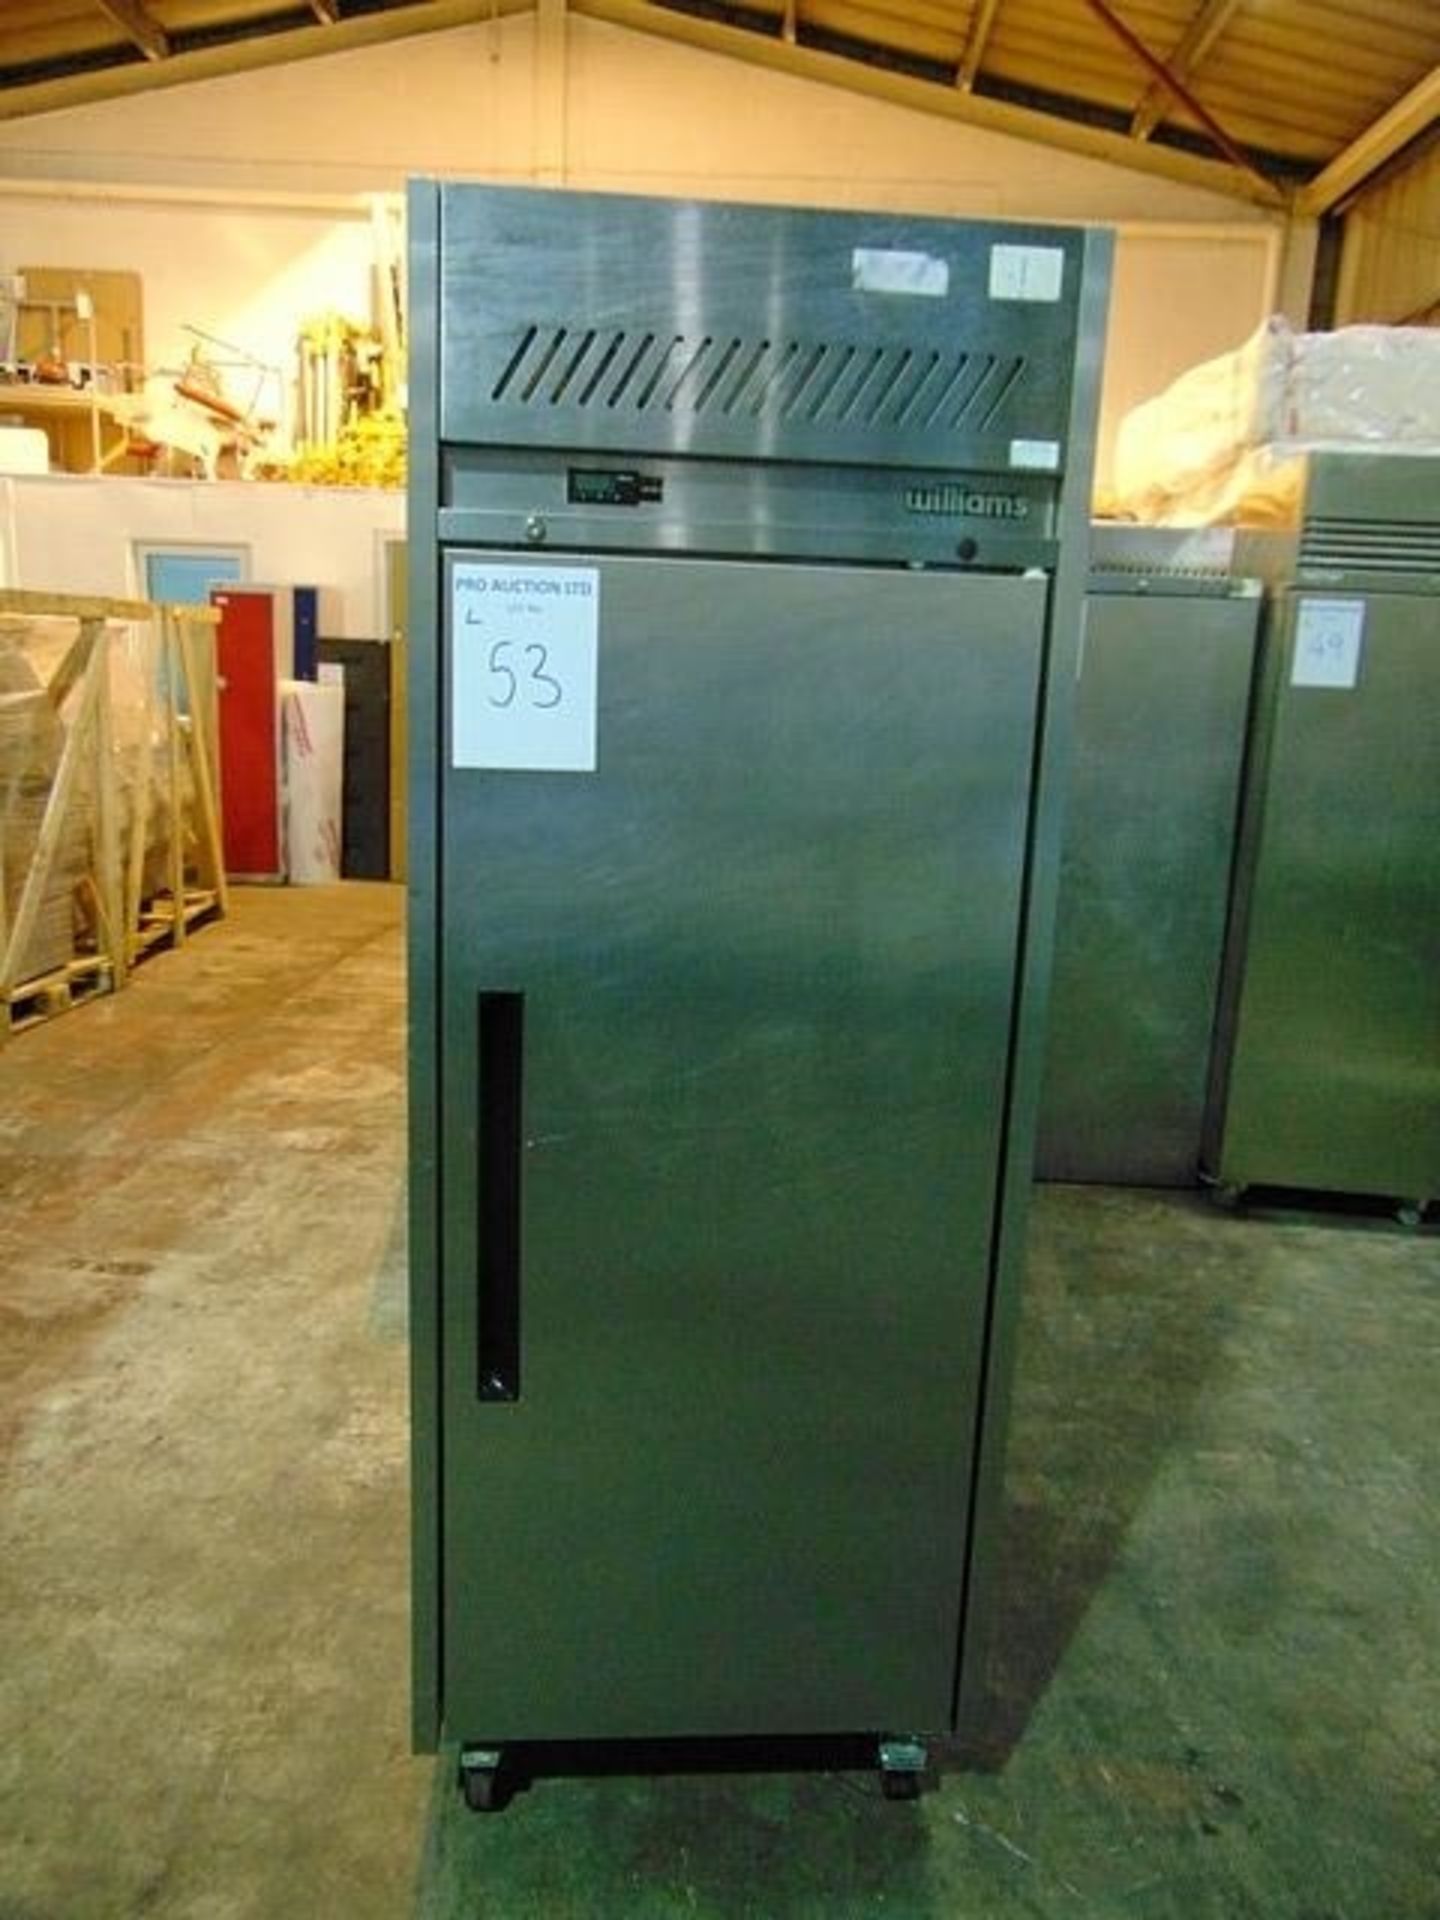 Williams LJ1SA stainless steel commercial upright freezer capacity 620 litres / 21.9 cuft